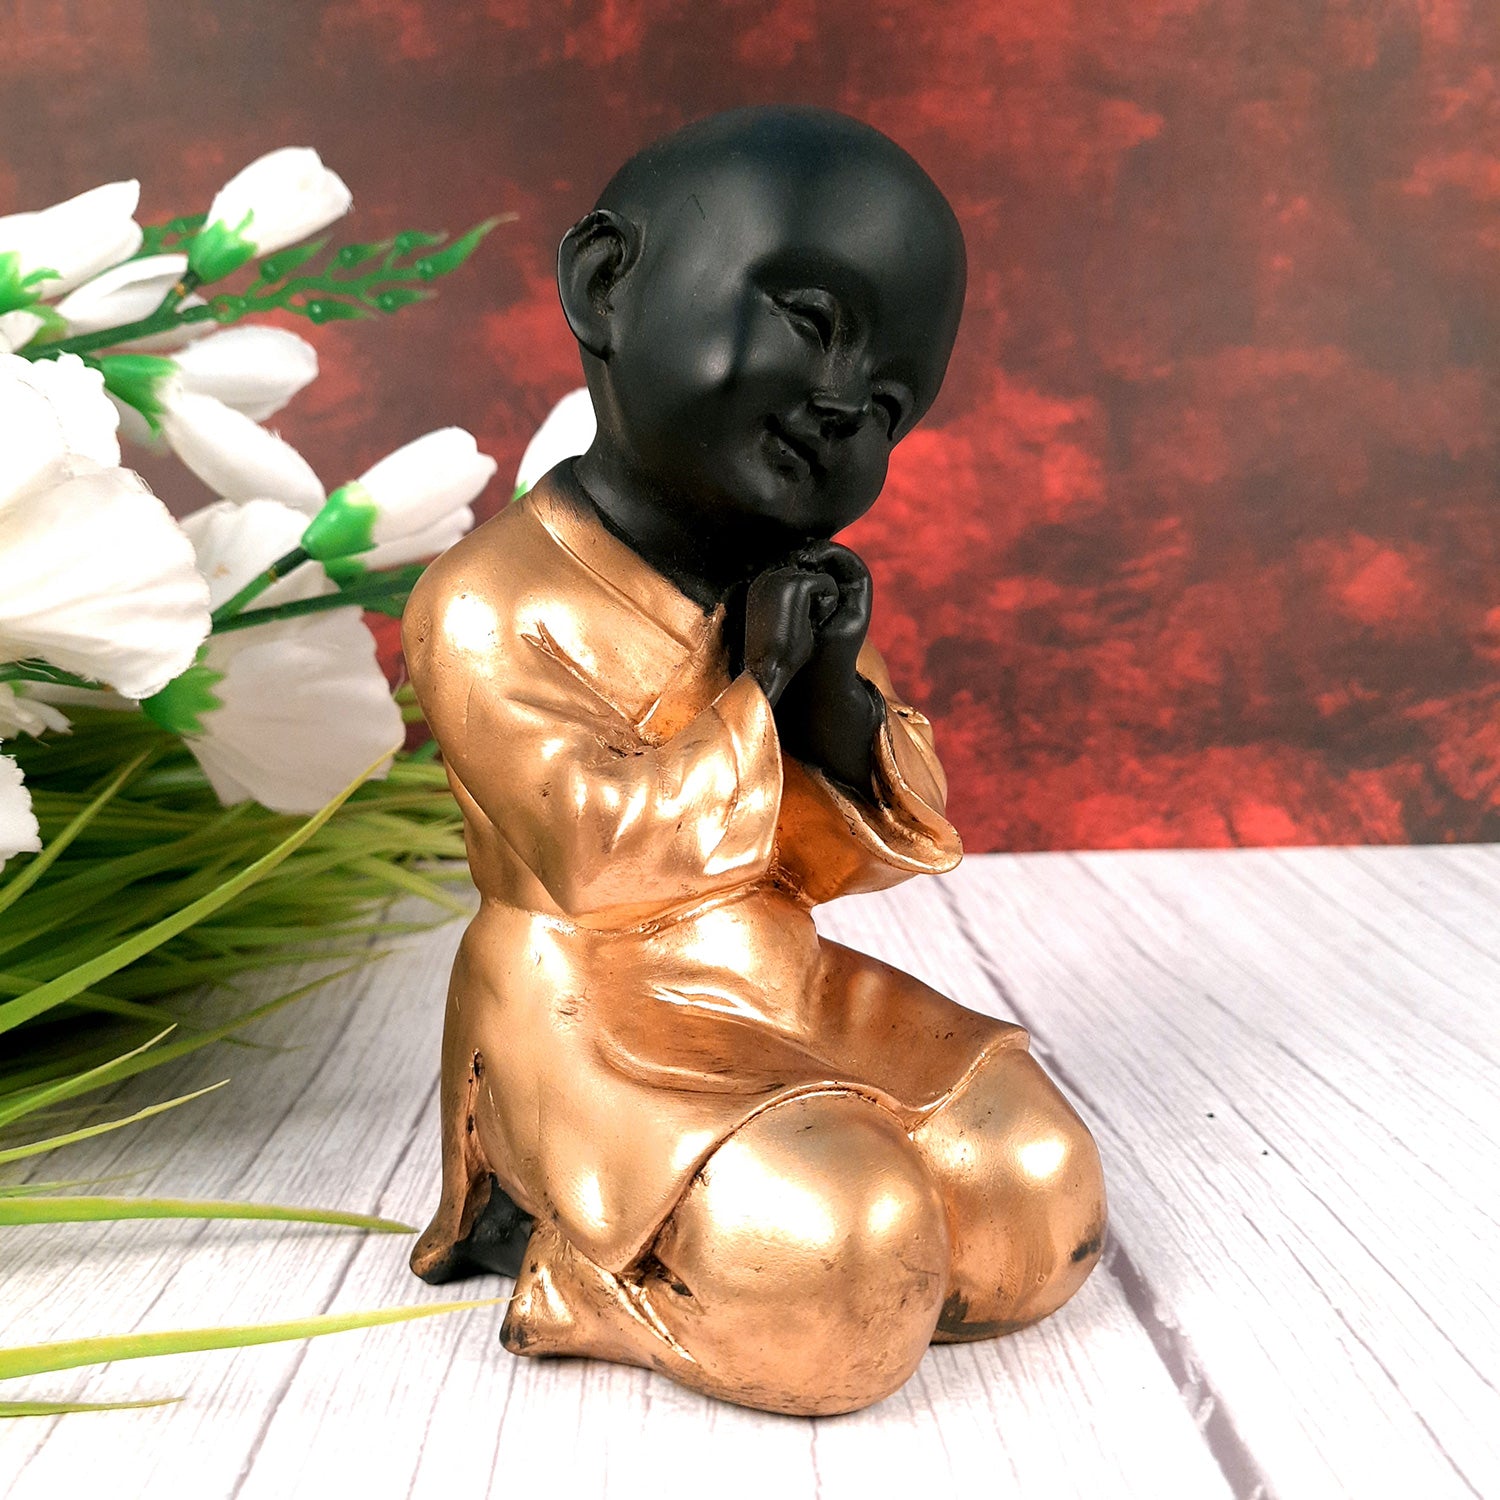 Baby Monk Showpiece with Rustic Look | Feng Shui Decor - For Good Luck, Home, Table, Office Decor & Gift - apkamart